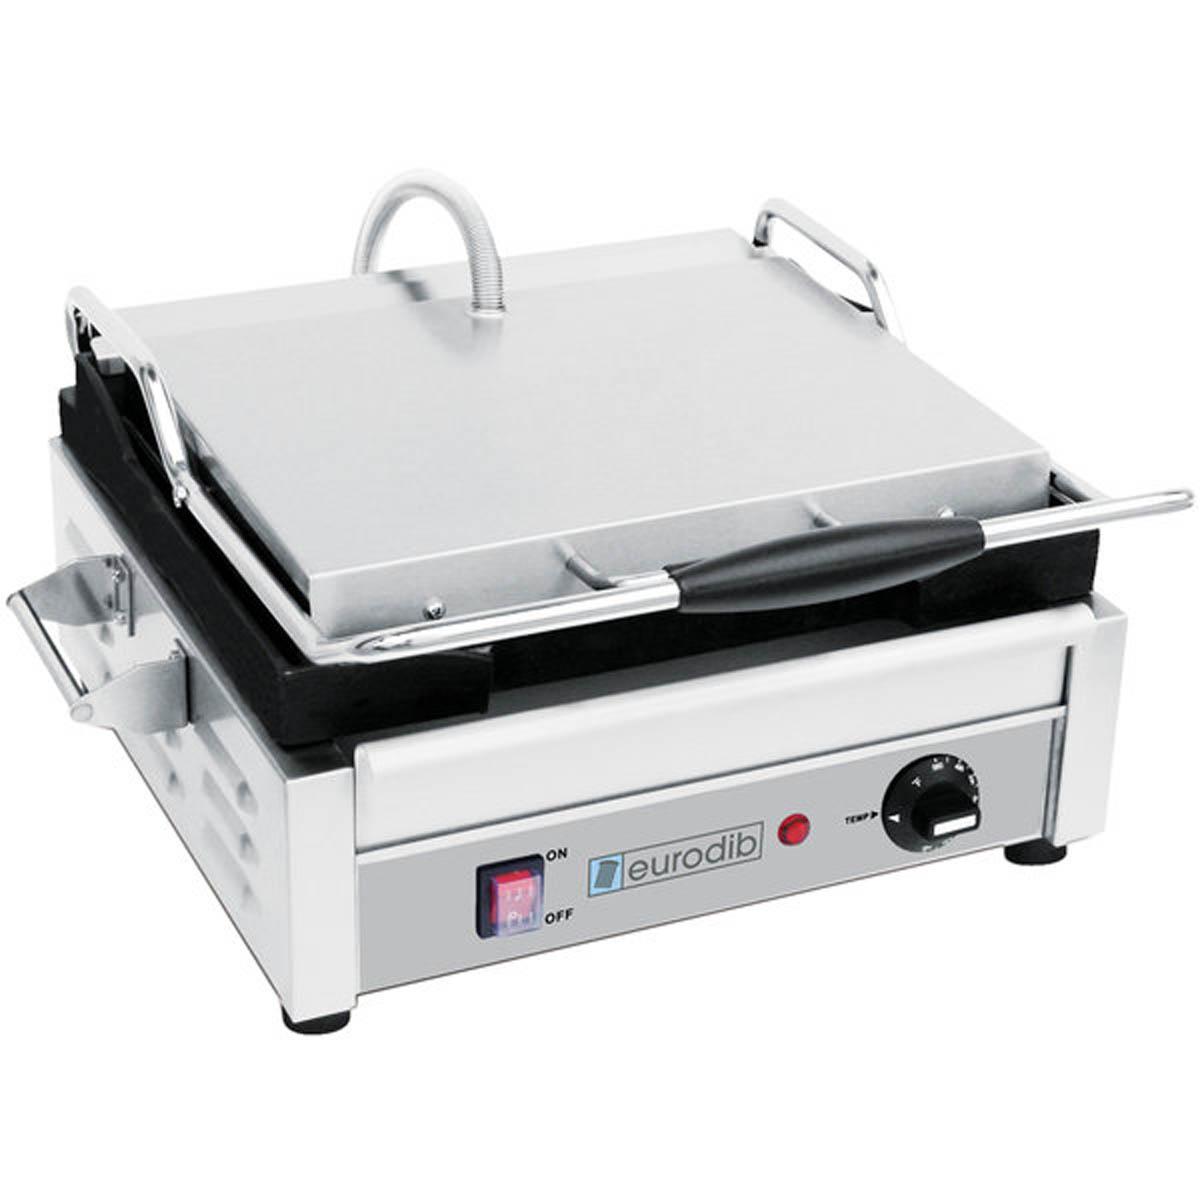 Eurodib USA SFE02345-240 Single Panini Grill with Grooved Plates - 14″ x 10″ Cooking Surface